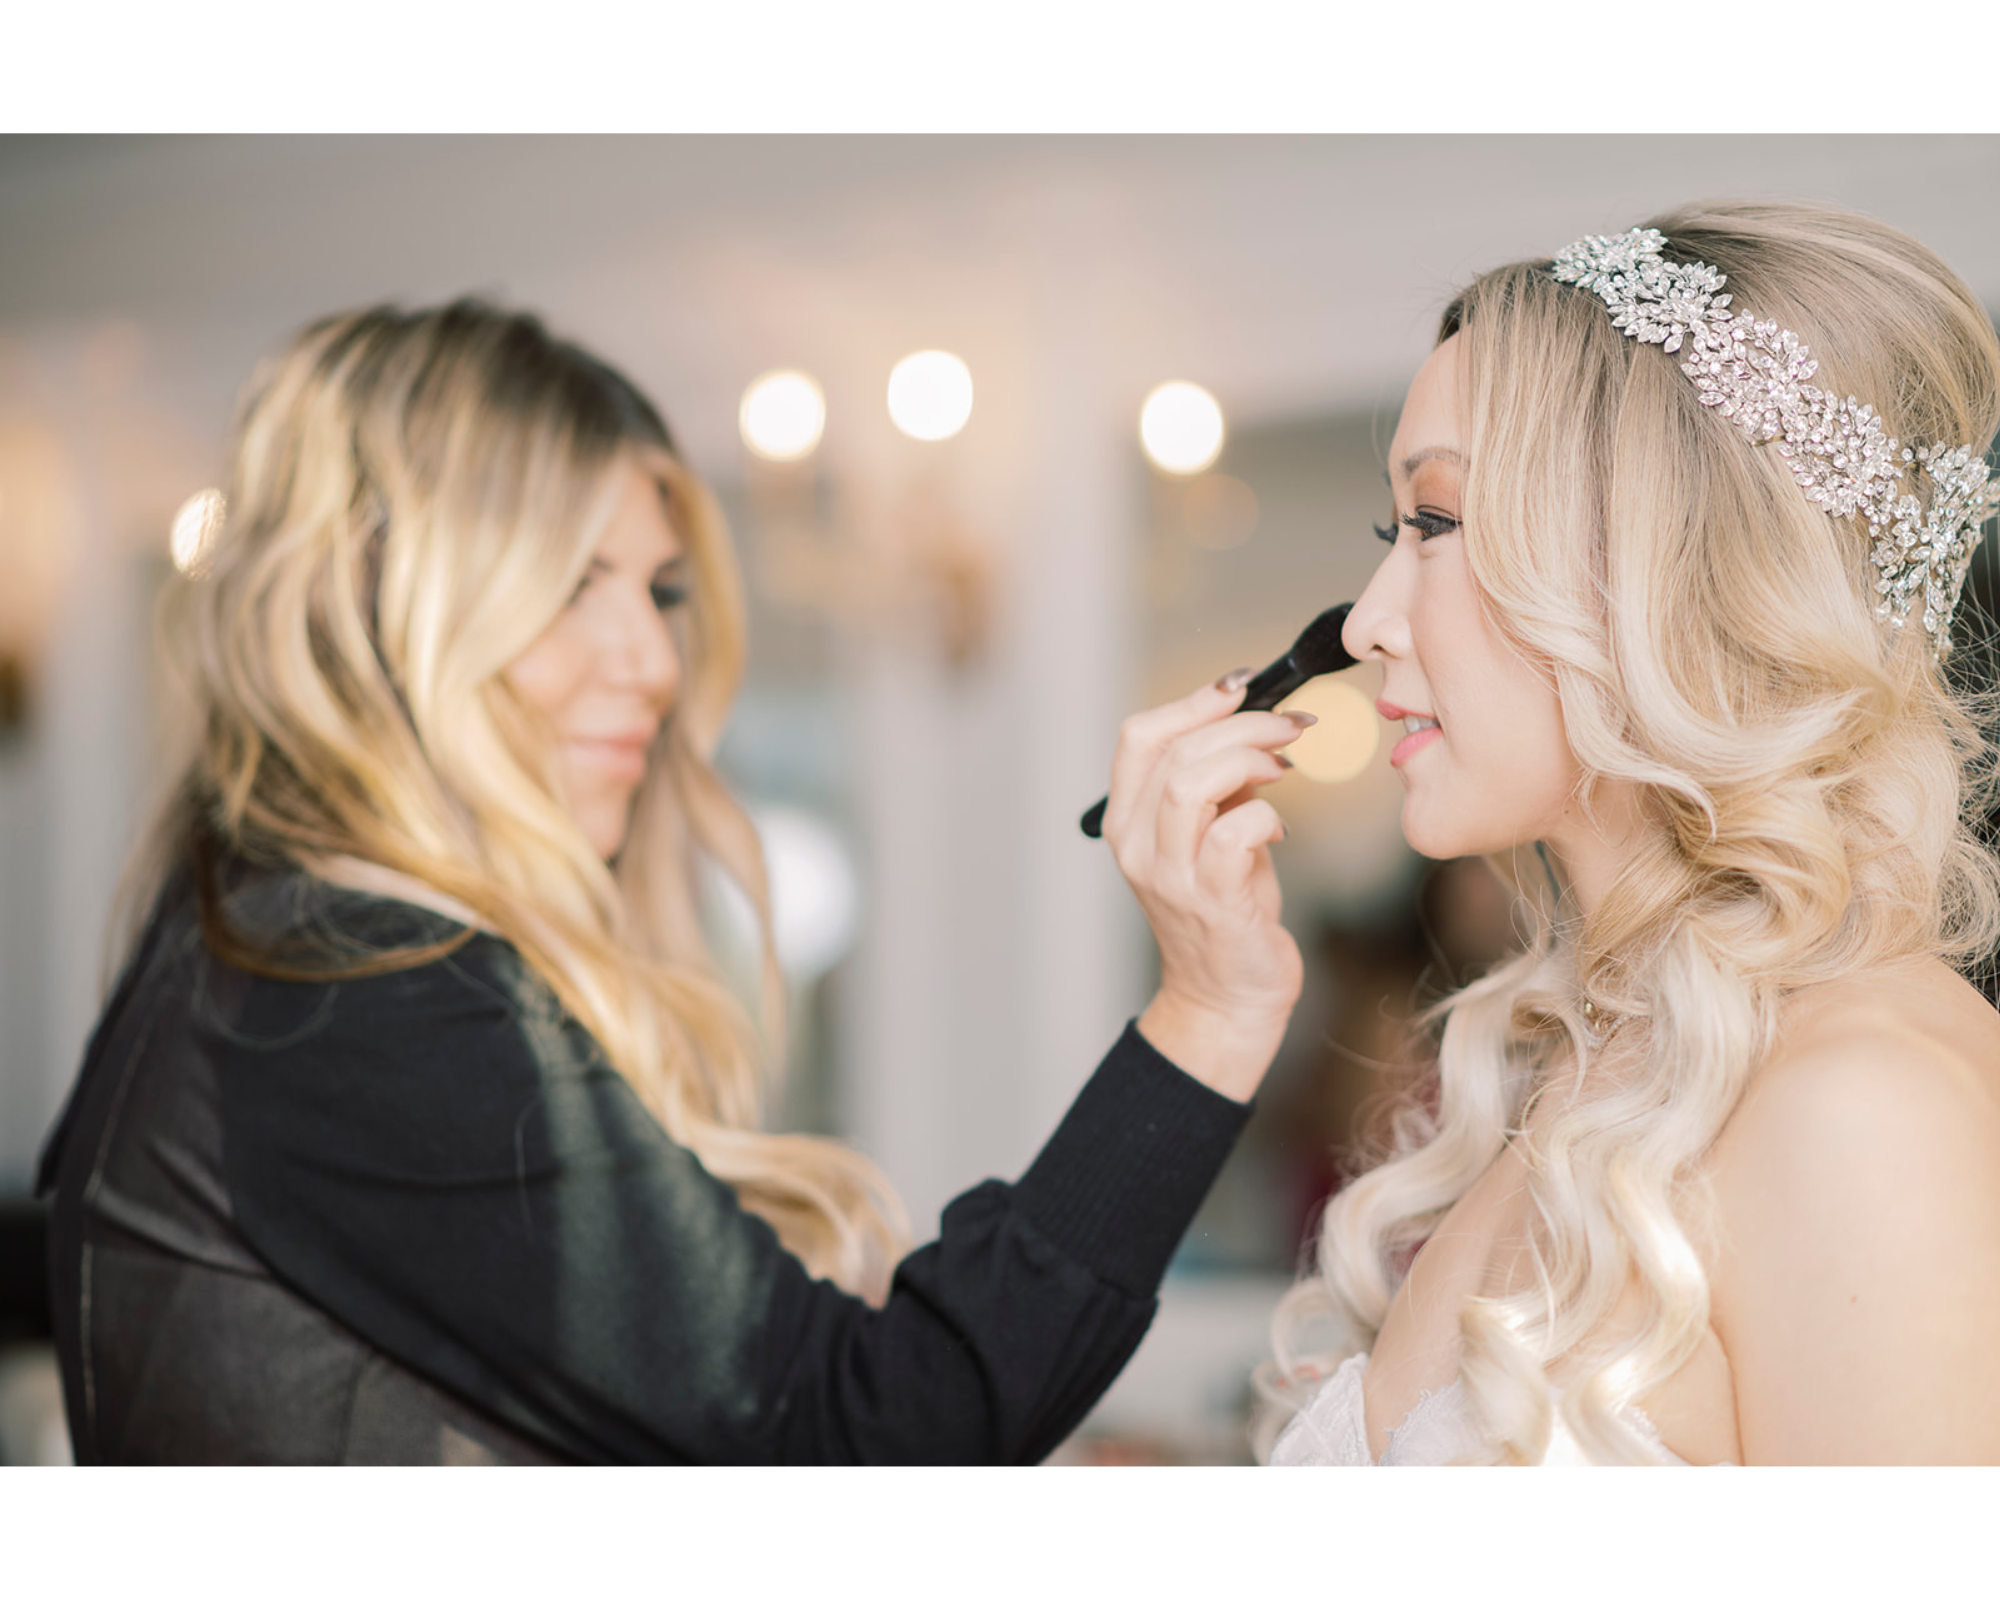 Lovely real bride Yvonne getting her makeup done on her big day. Her blonde hair is down and she’s wearing a sparkling halo bridal headpiece.